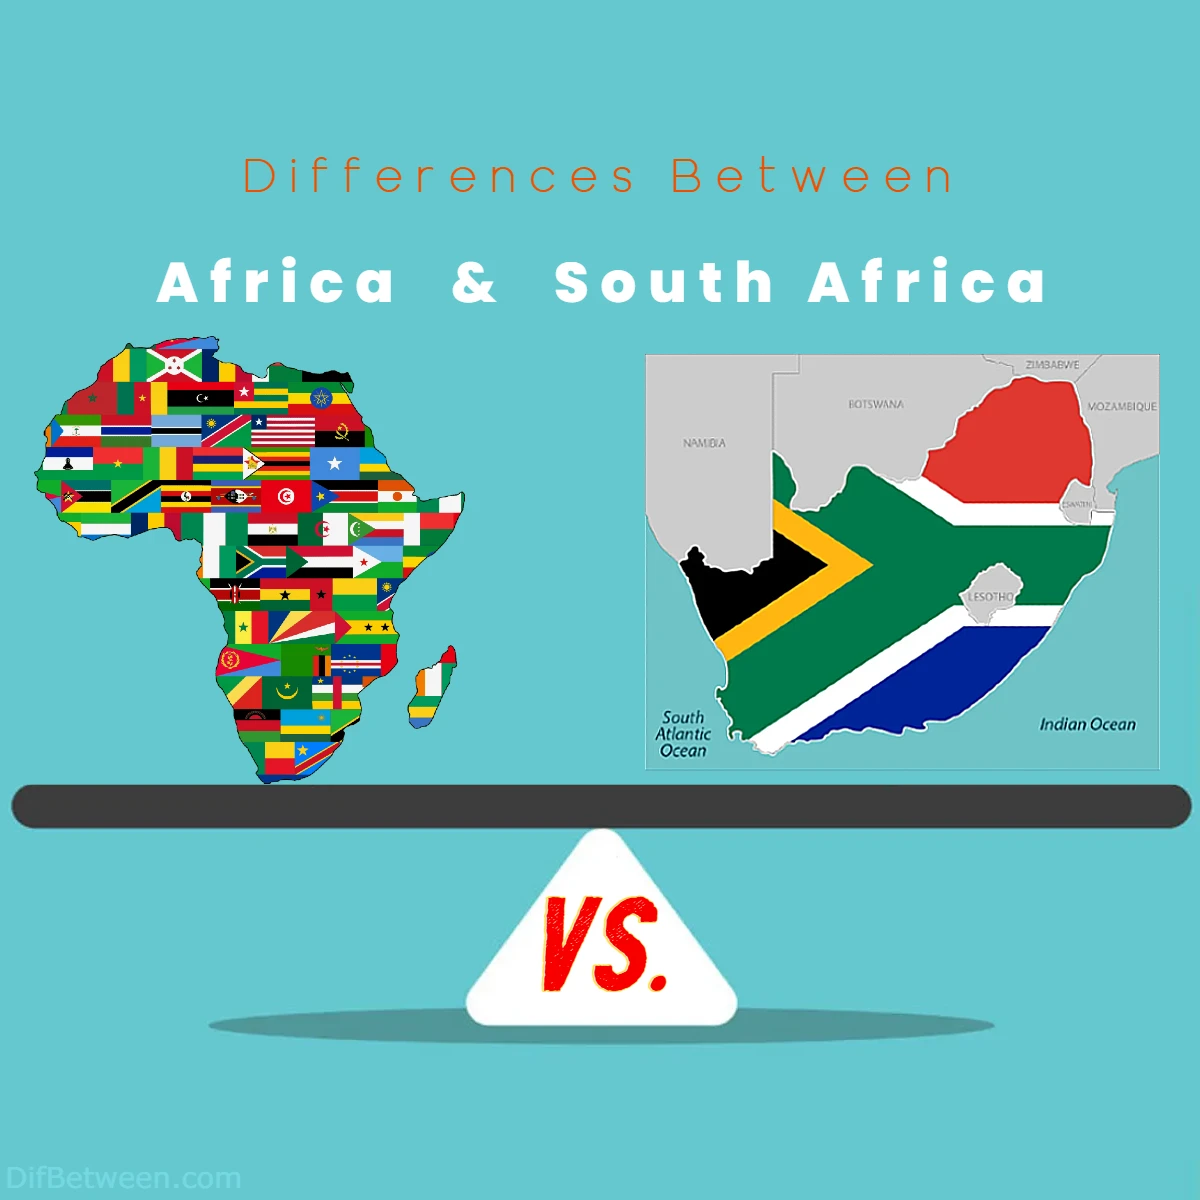 Differences Between Africa vs South Africa